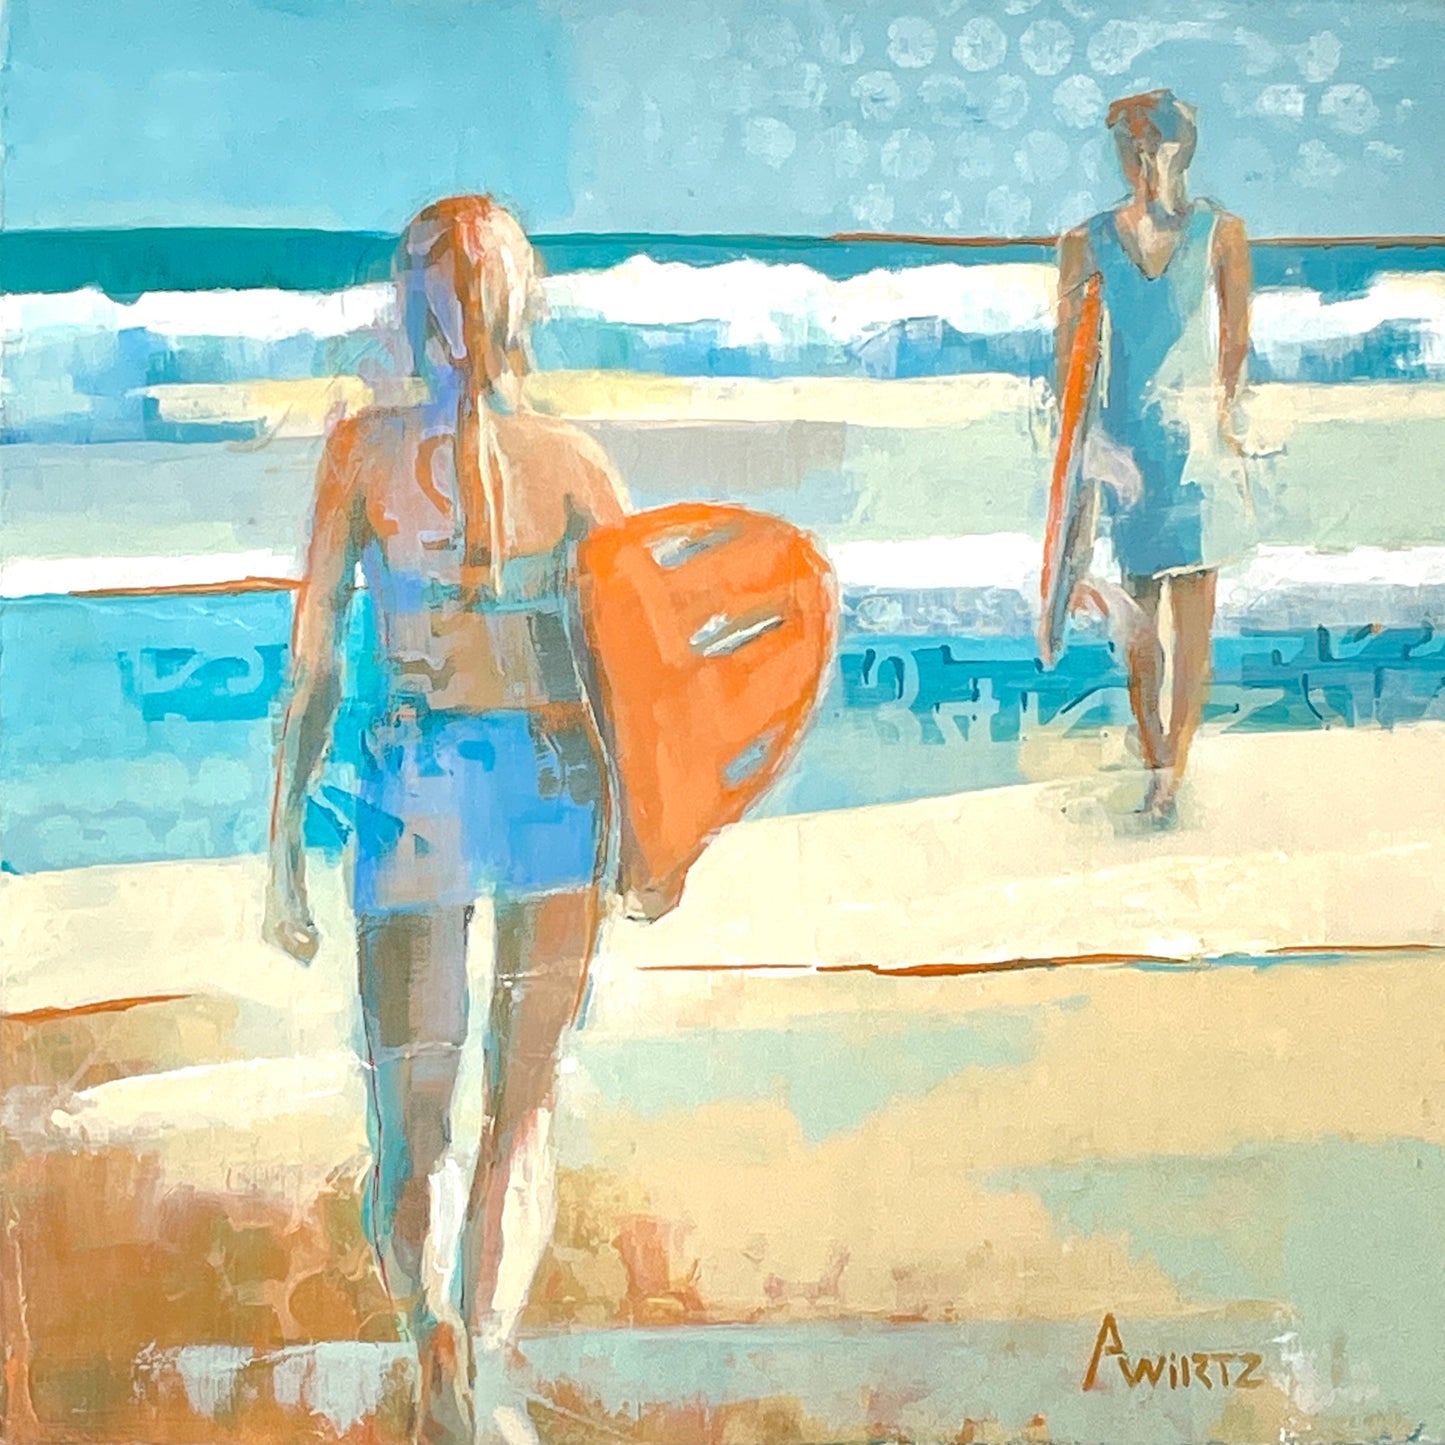 A contemporary acrylic painting on canvas  that explores the surfers’ desire to catch the perfect wave in sunny California.The energetic brushstrokes and various textures bring life and vibrance to this beach scene. Patterns appear within the sets of waves providing a playful vibe balanced with sophisticated neutrals.